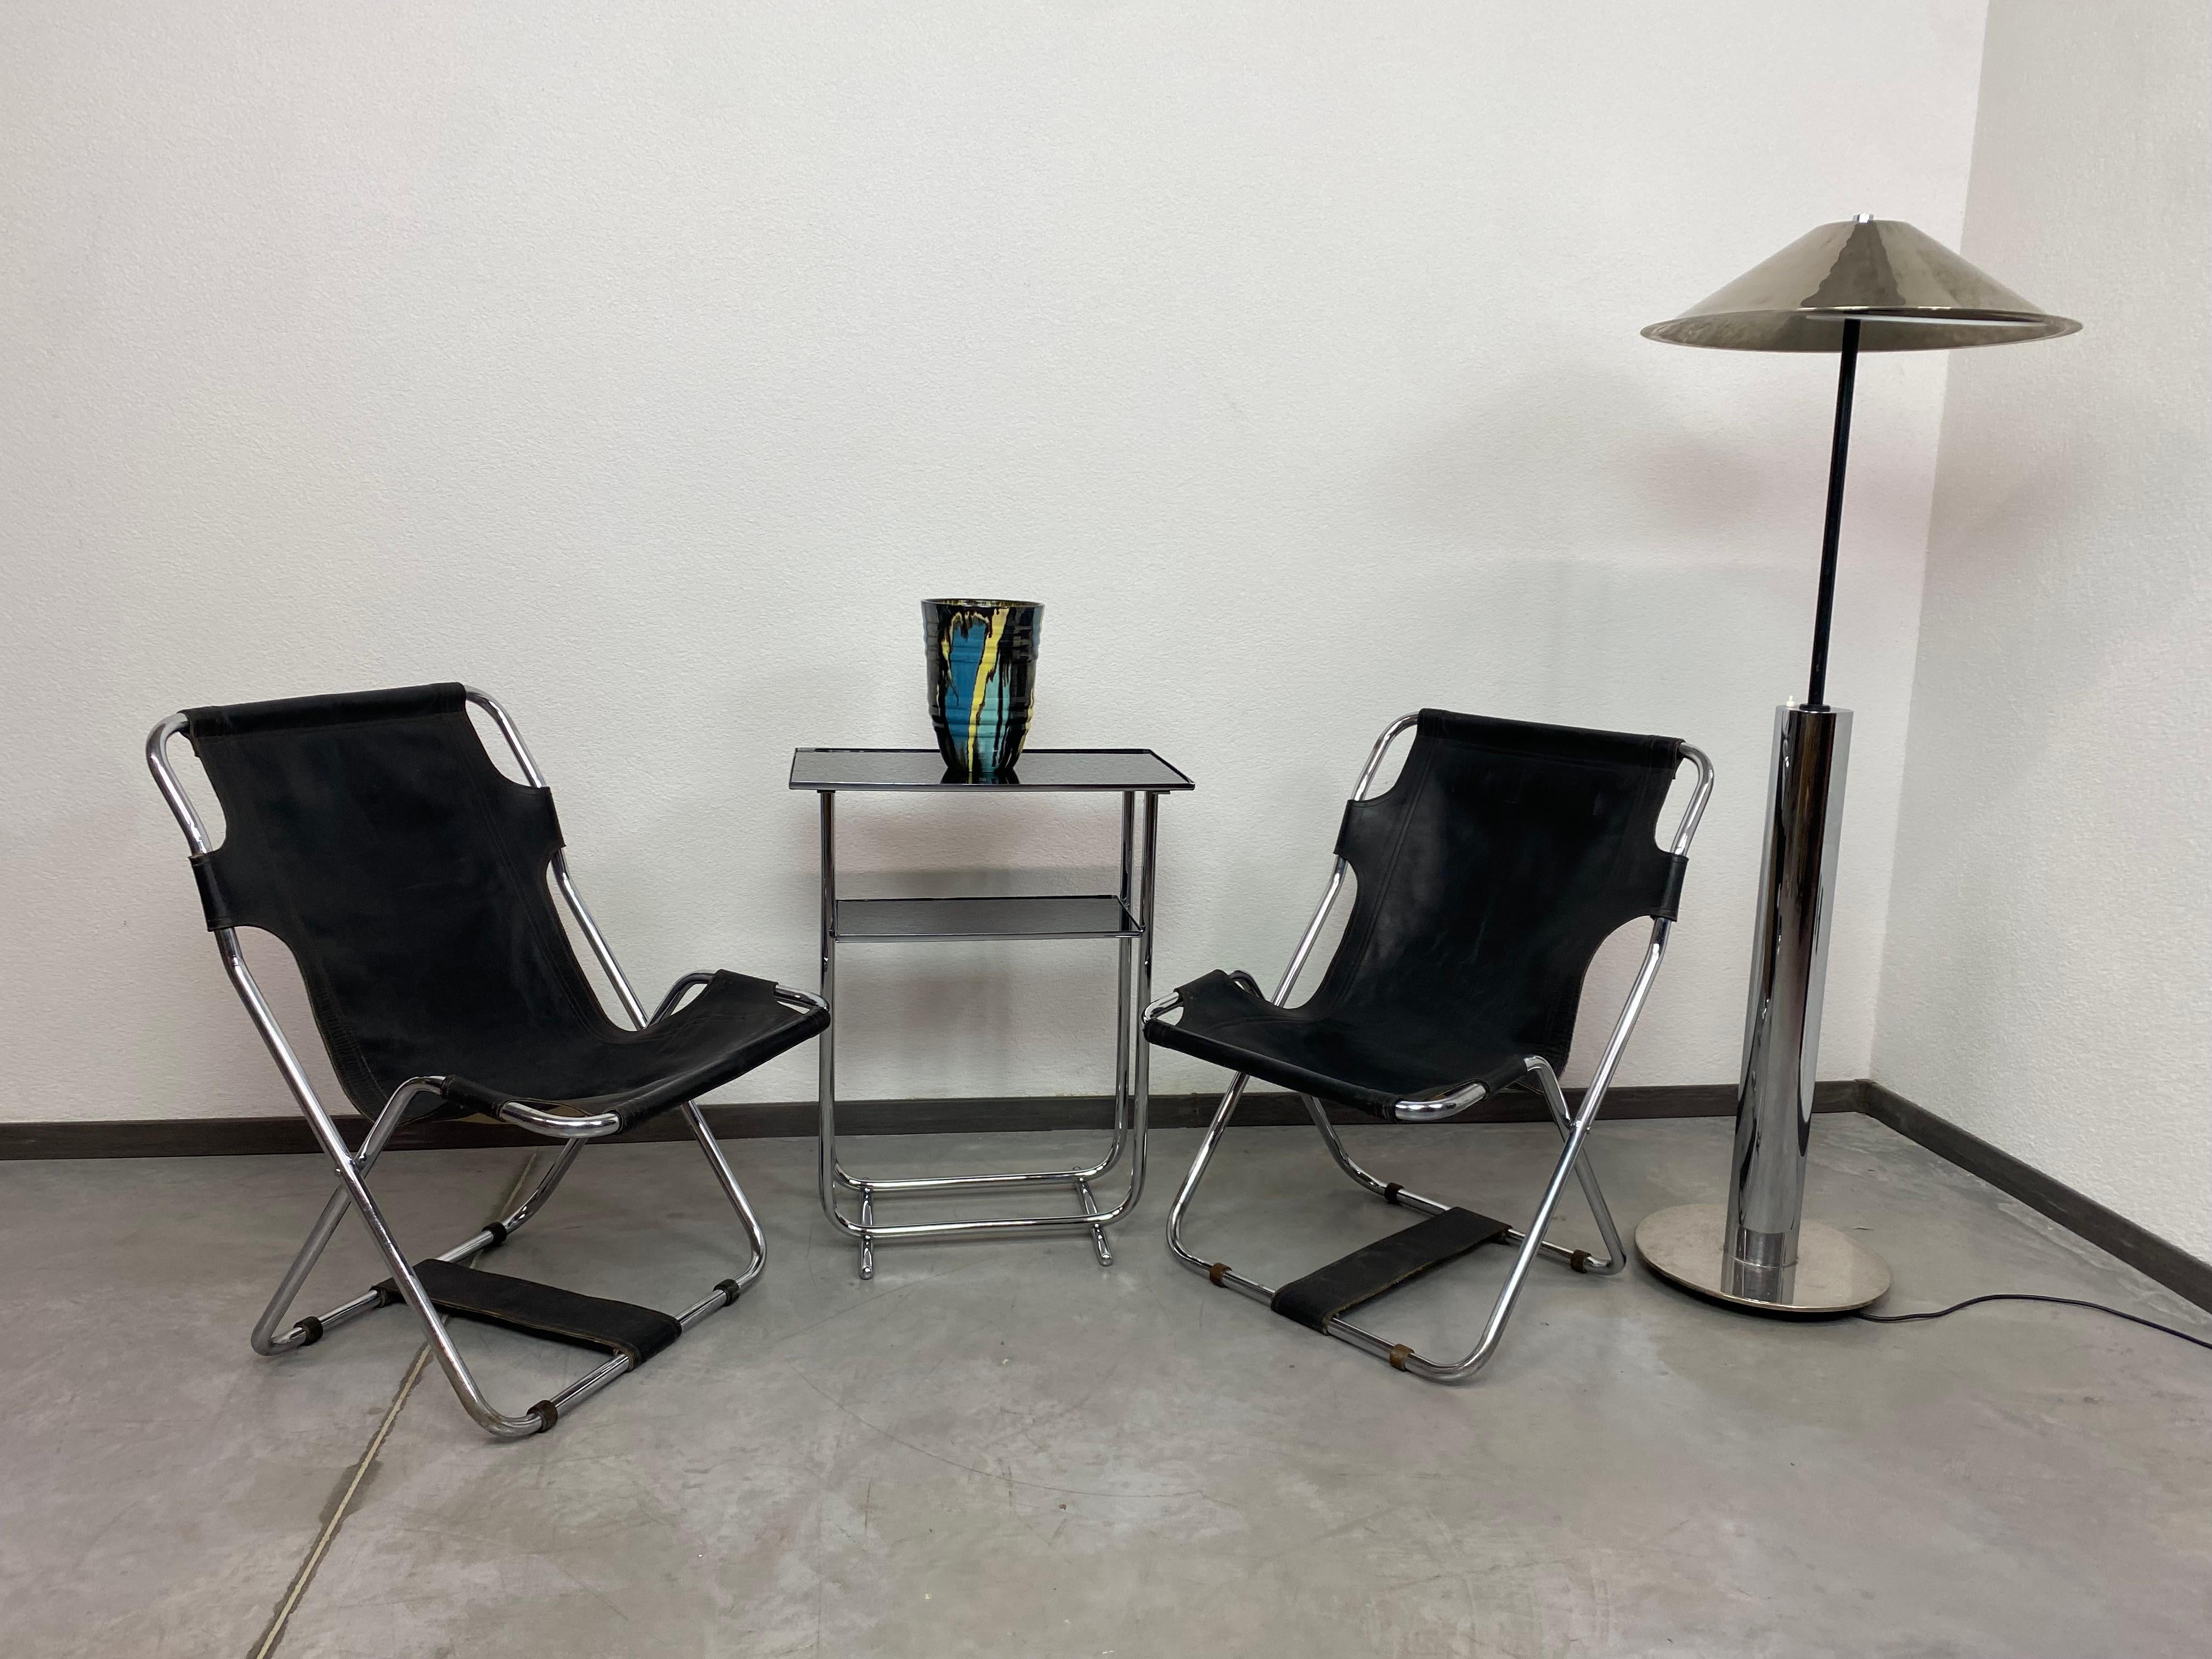 Leather folding chairs in Bauhaus style from around 1960 in very nice original condition with slight signs of use.